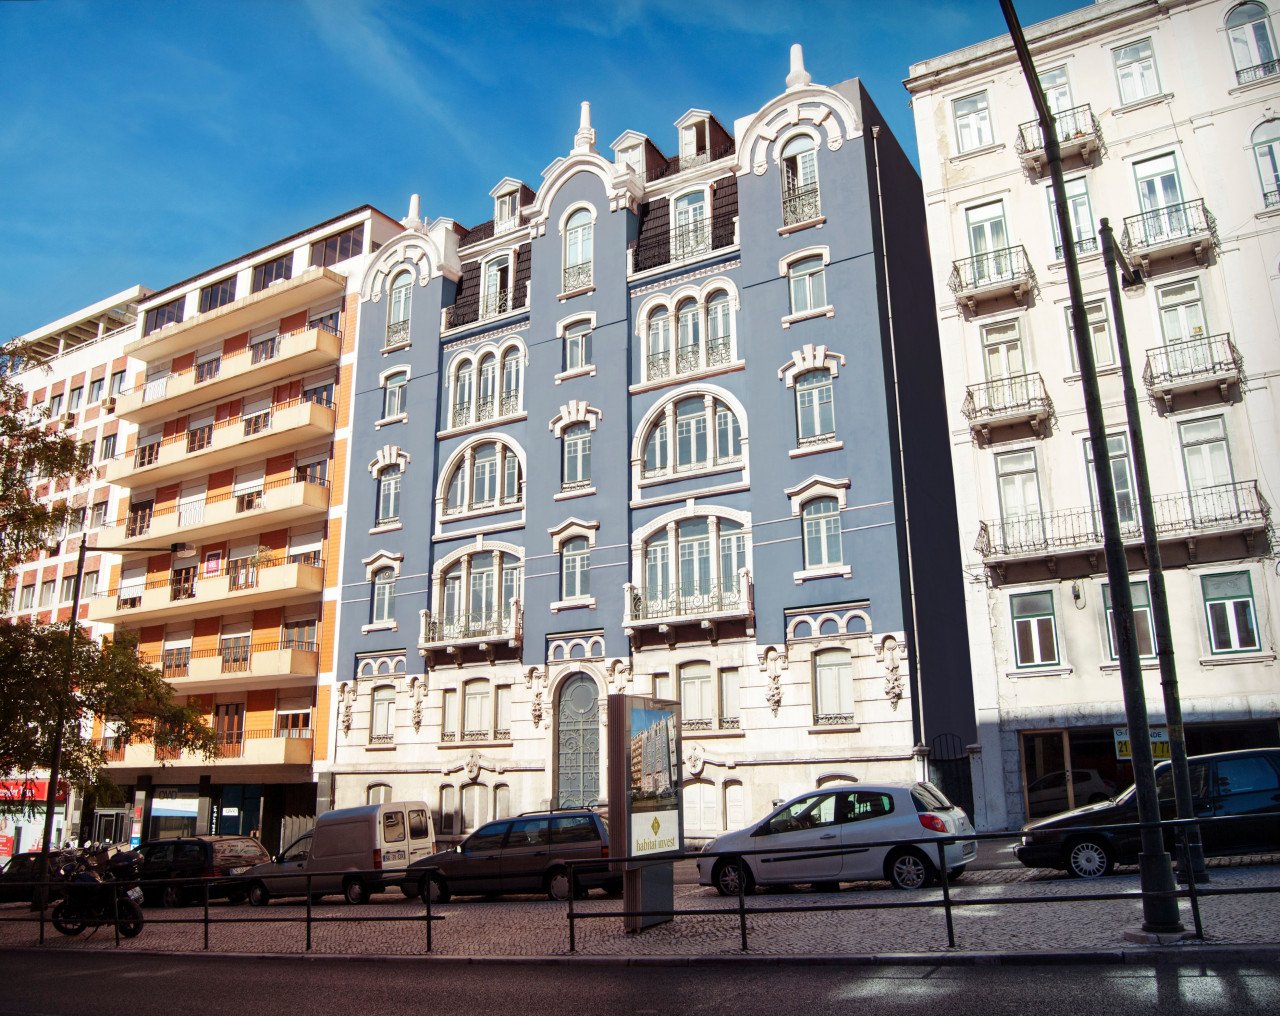 Property for Sale: Apartment (Flat) in City Area, Lisbon  | Key Realtor Cyprus